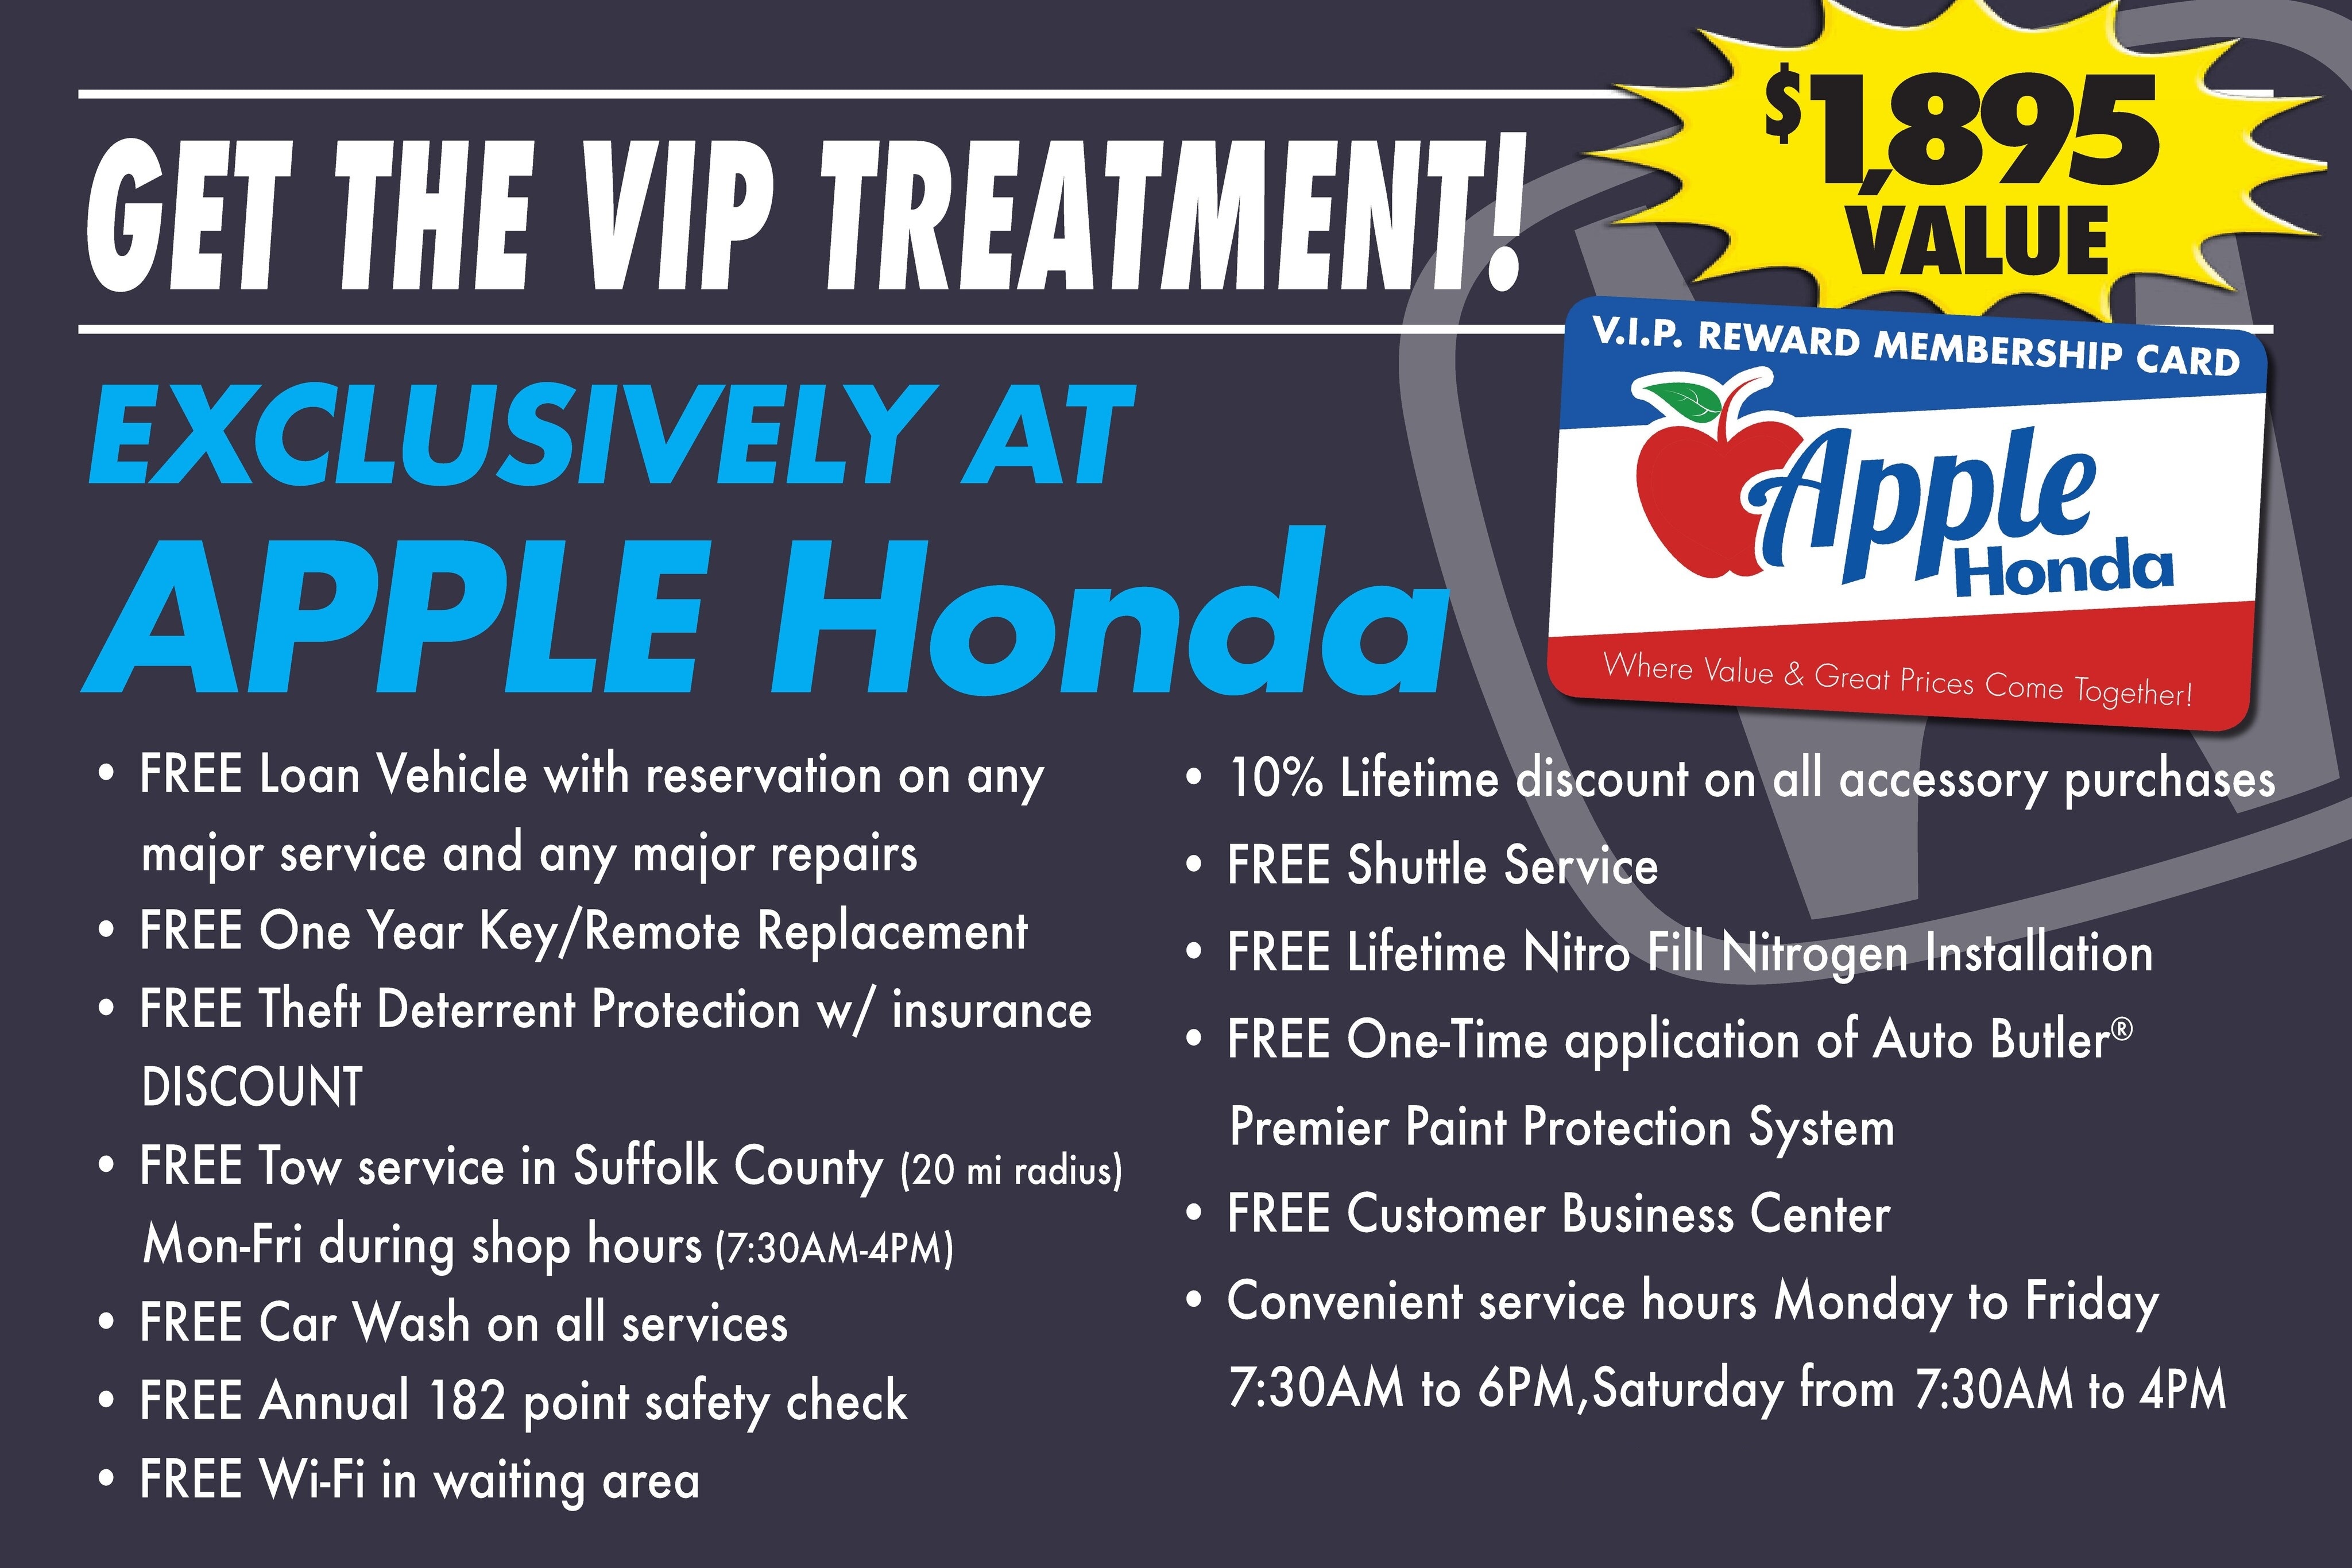 Buy and Service Your Vehicle at Apple Honda